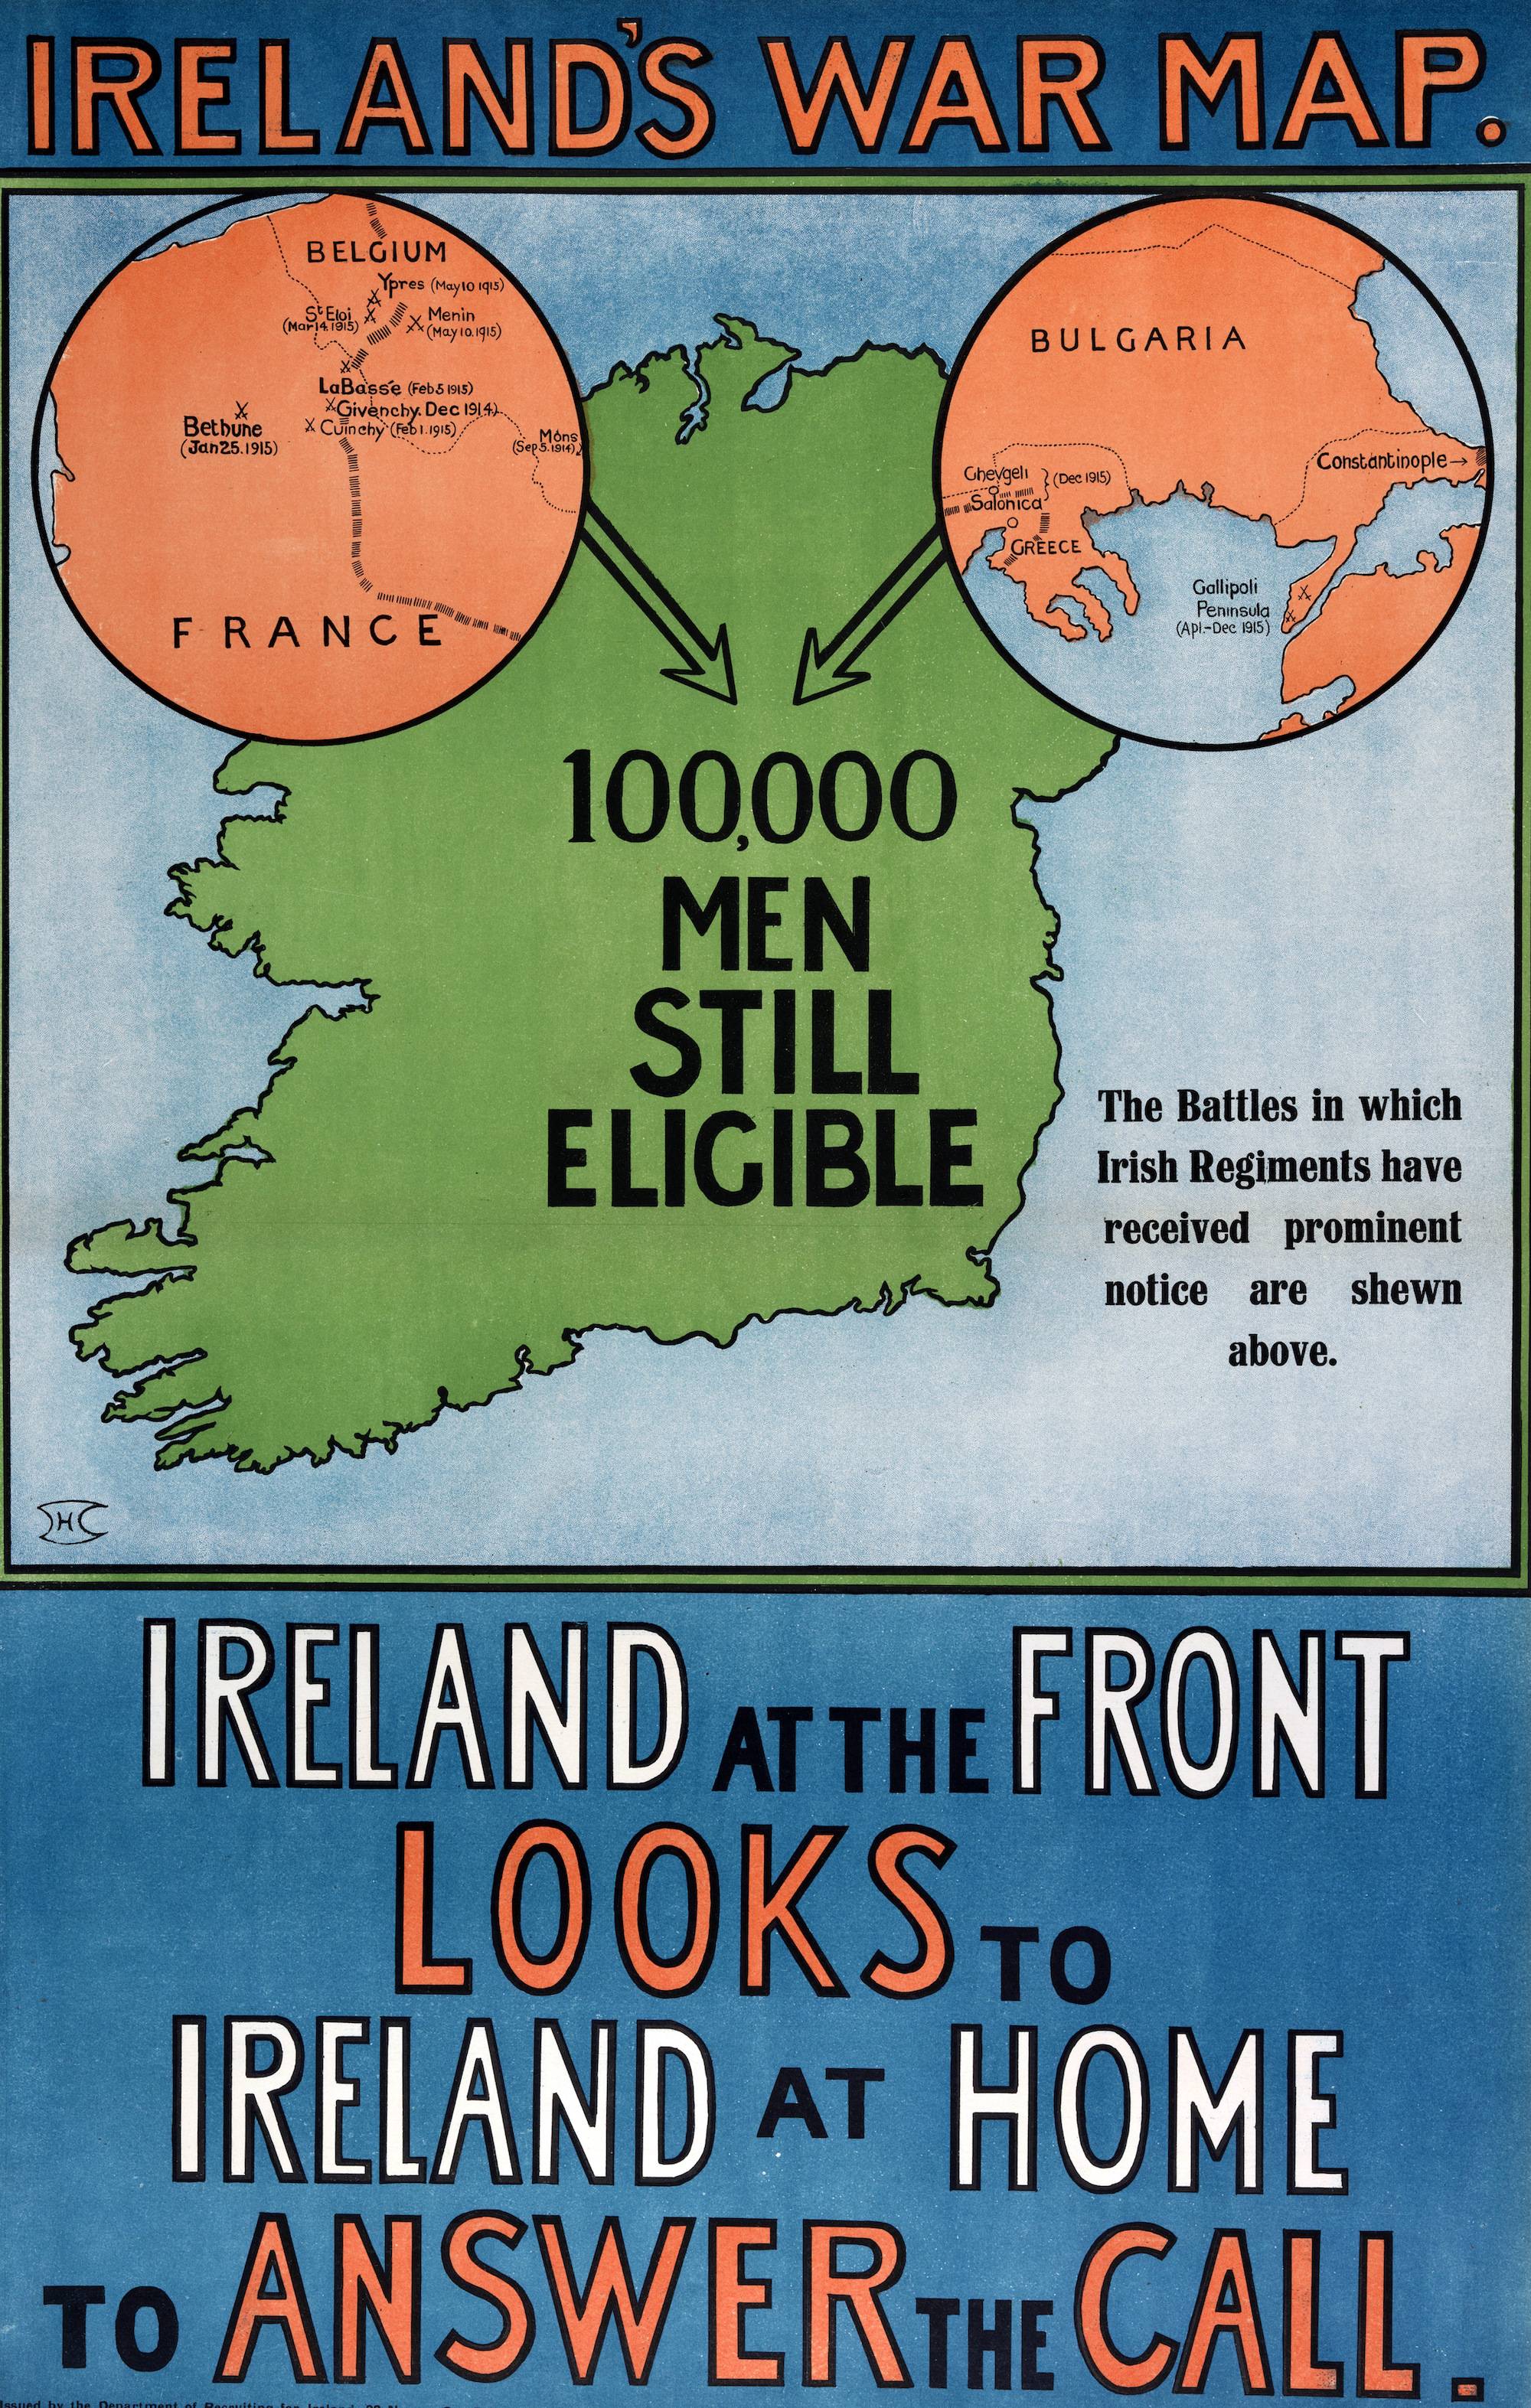 World War I Recruiting Collection: These posters and leaflets were issued by the British Army in Dublin during the war.